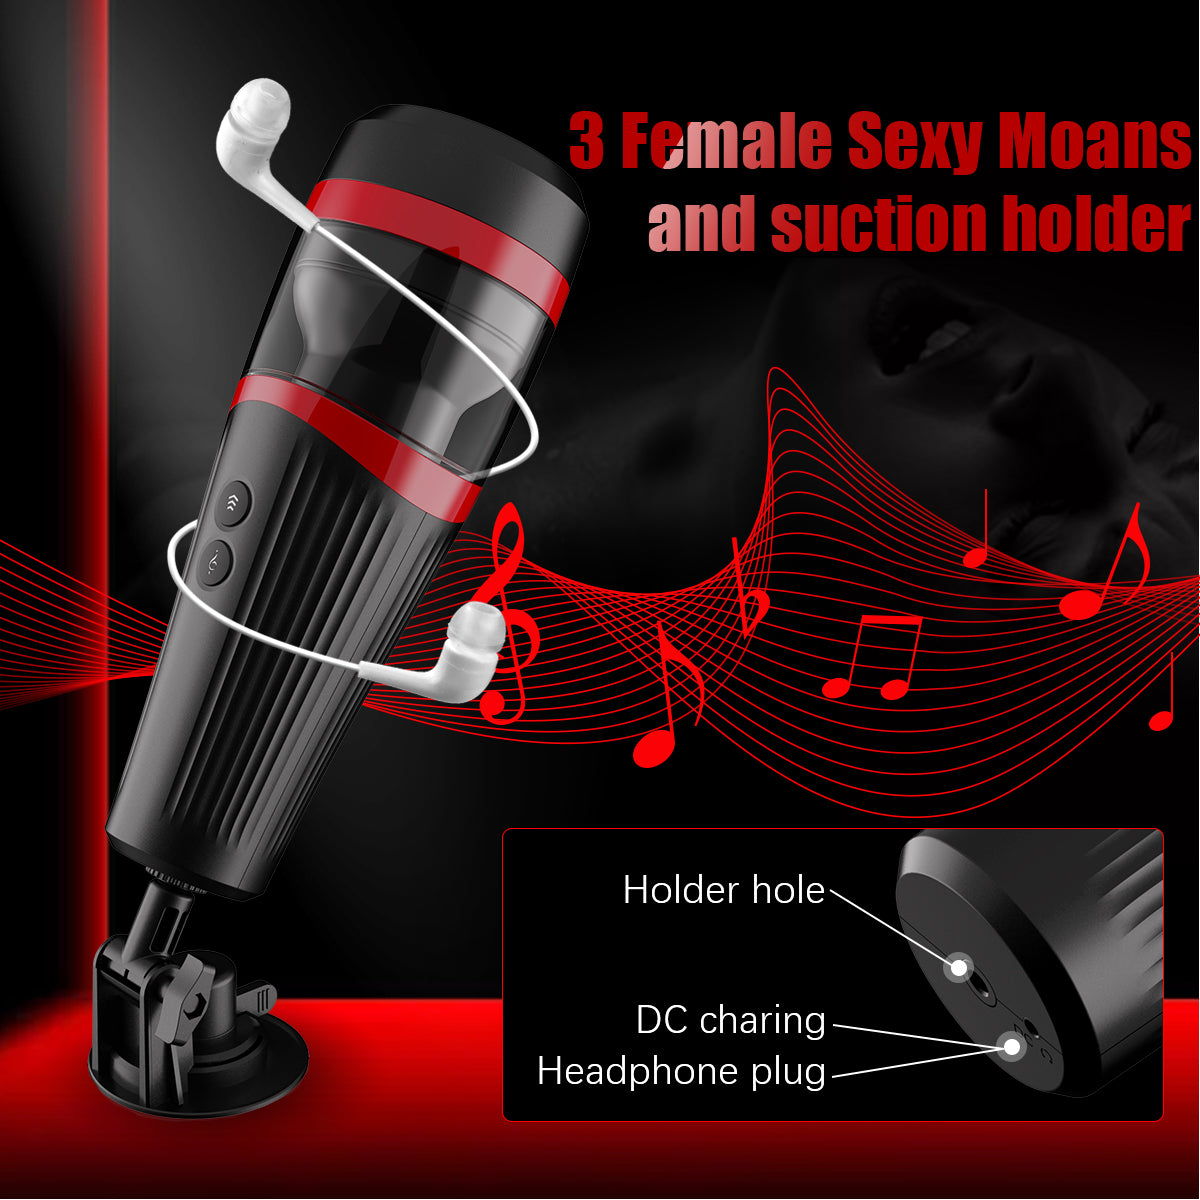 Joker Male Hands free Masturbrator with Suction Cup